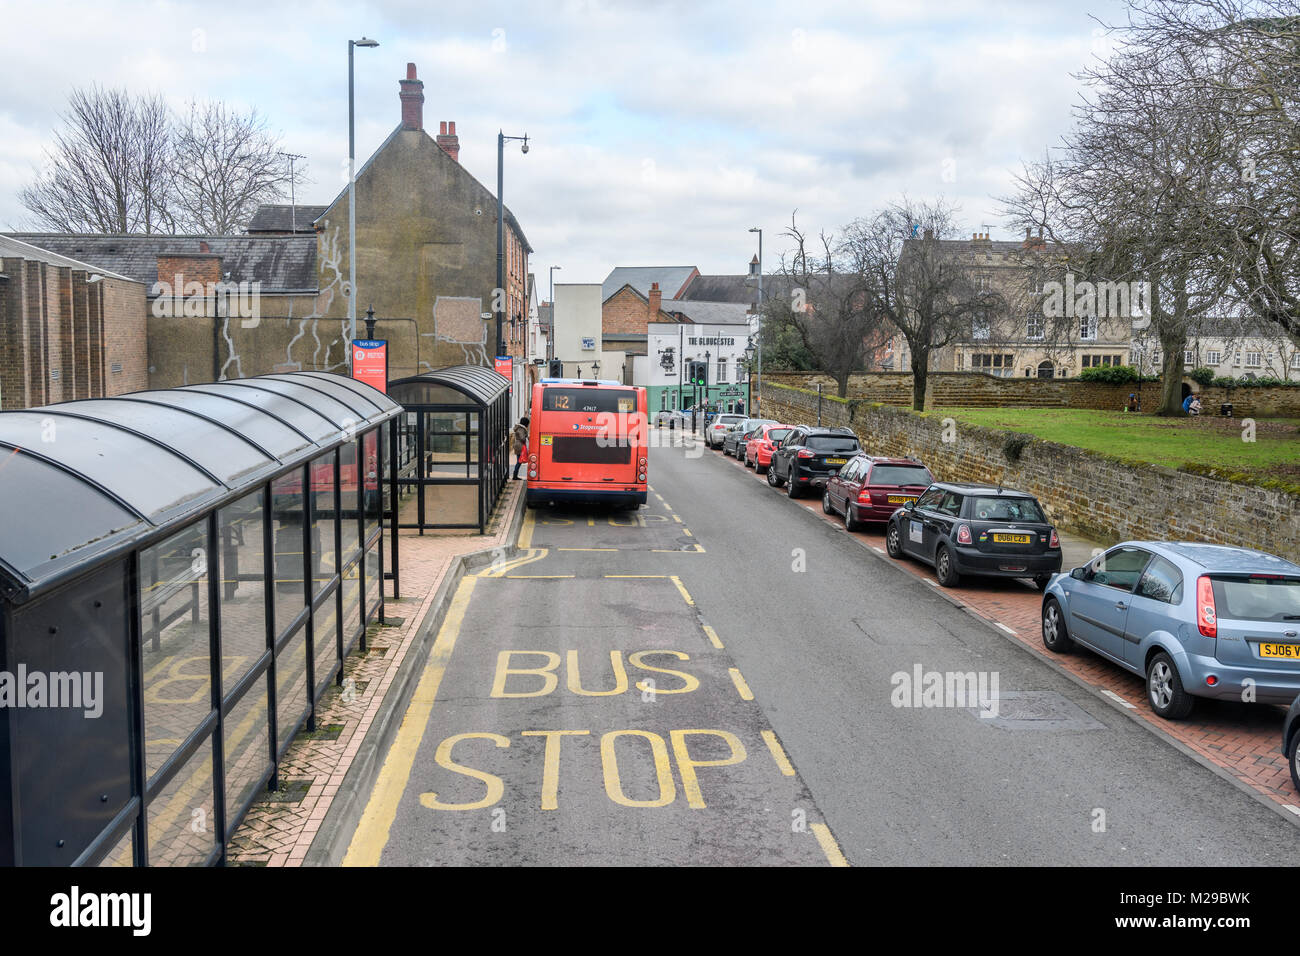 The road side bus station at Wellingborough, England. Stock Photo